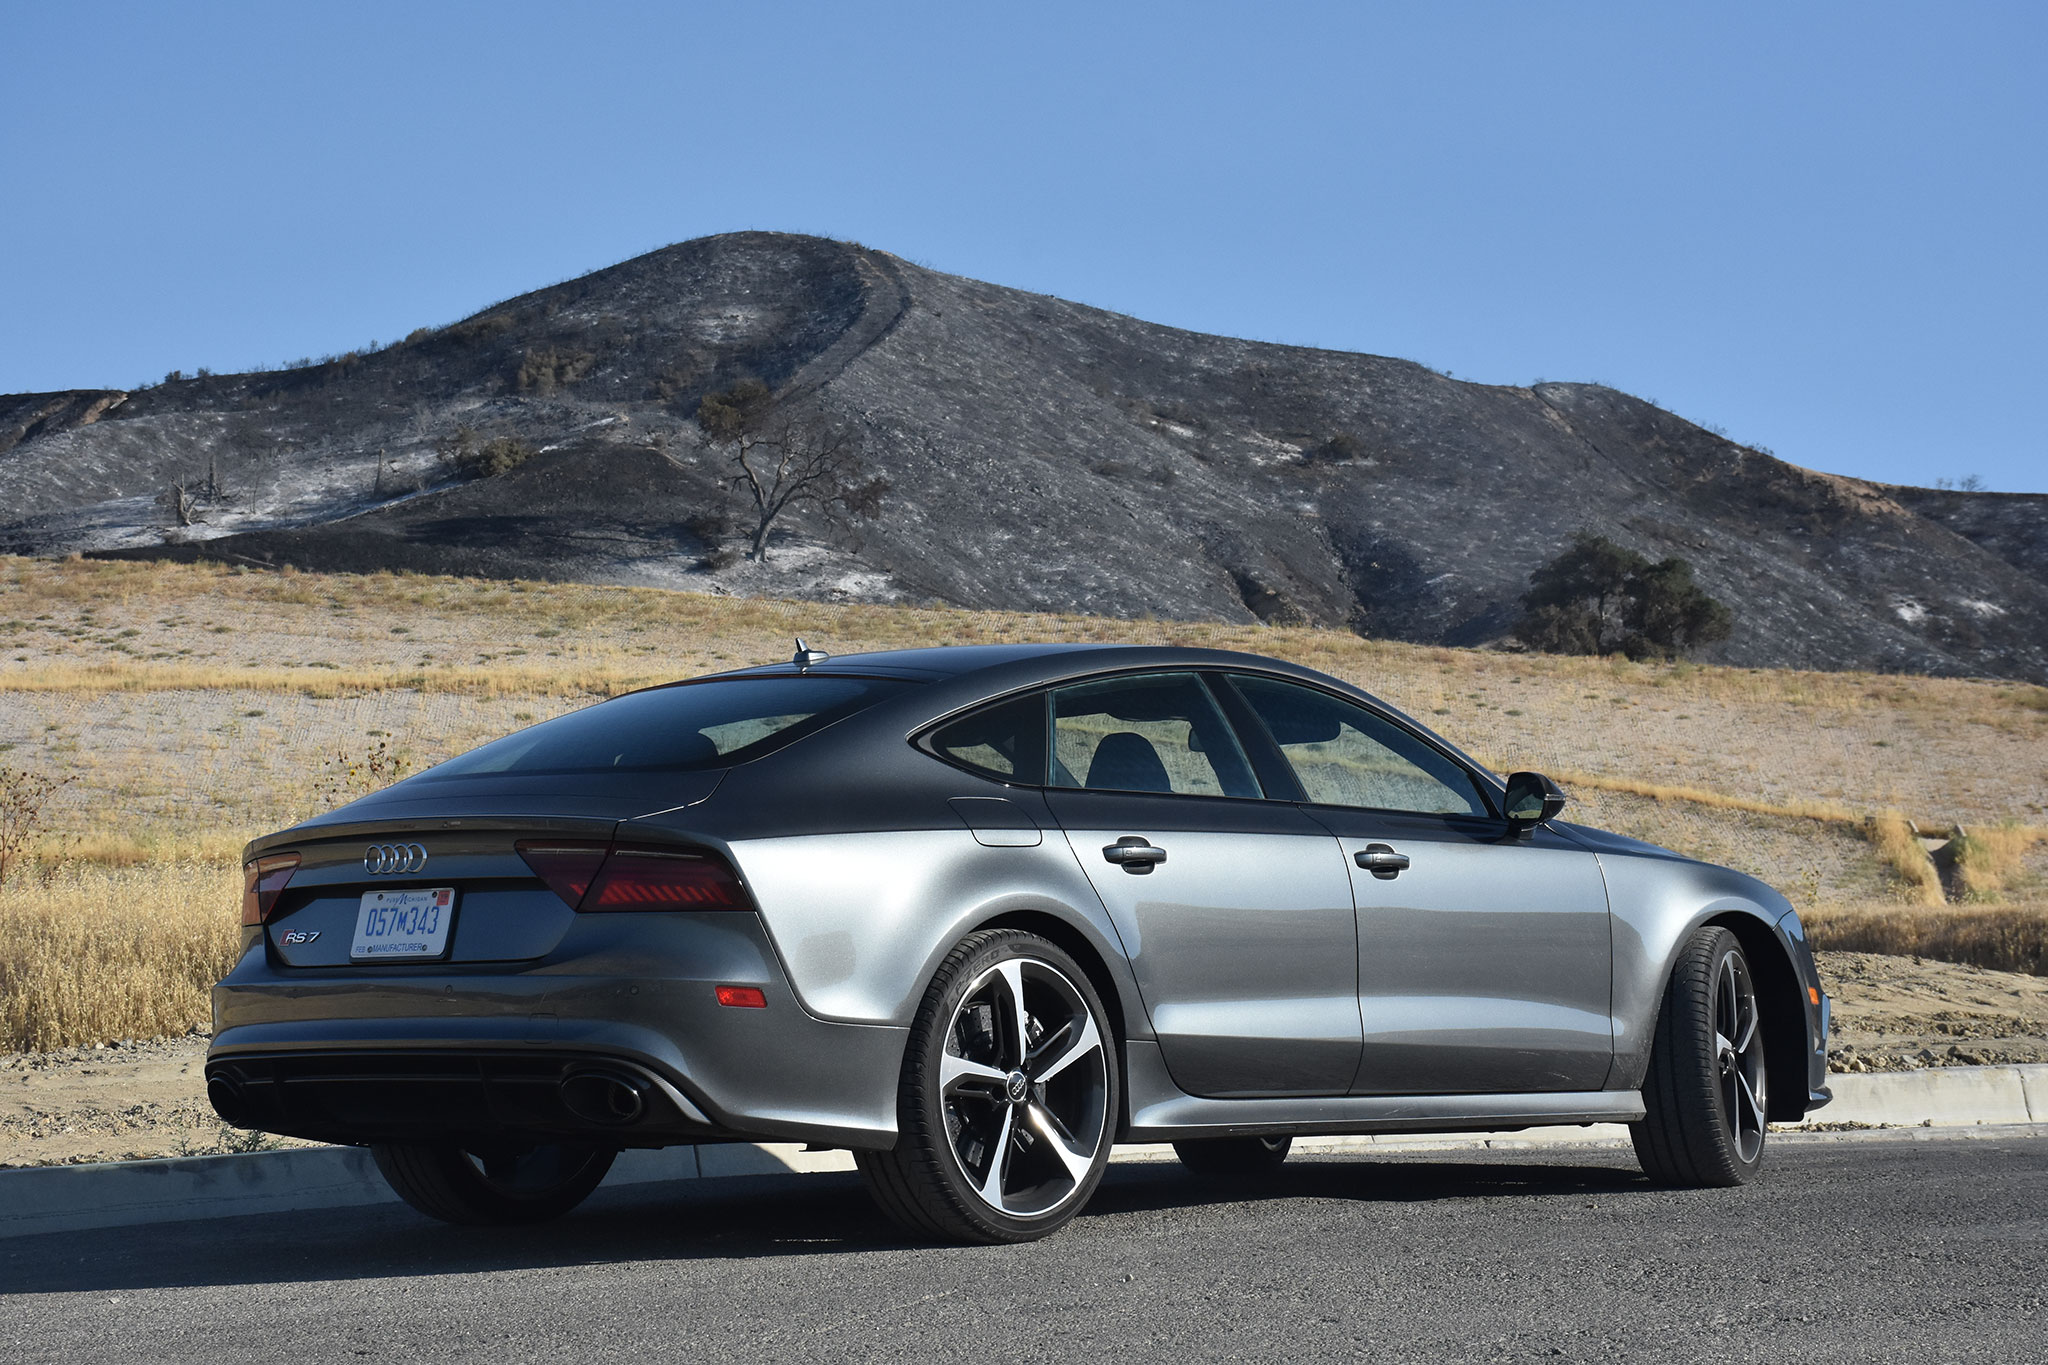 Audi Rs7 Backgrounds On Wallpapers Vista Audi Rs 7 2017 2048x1365 Wallpaper Teahub Io